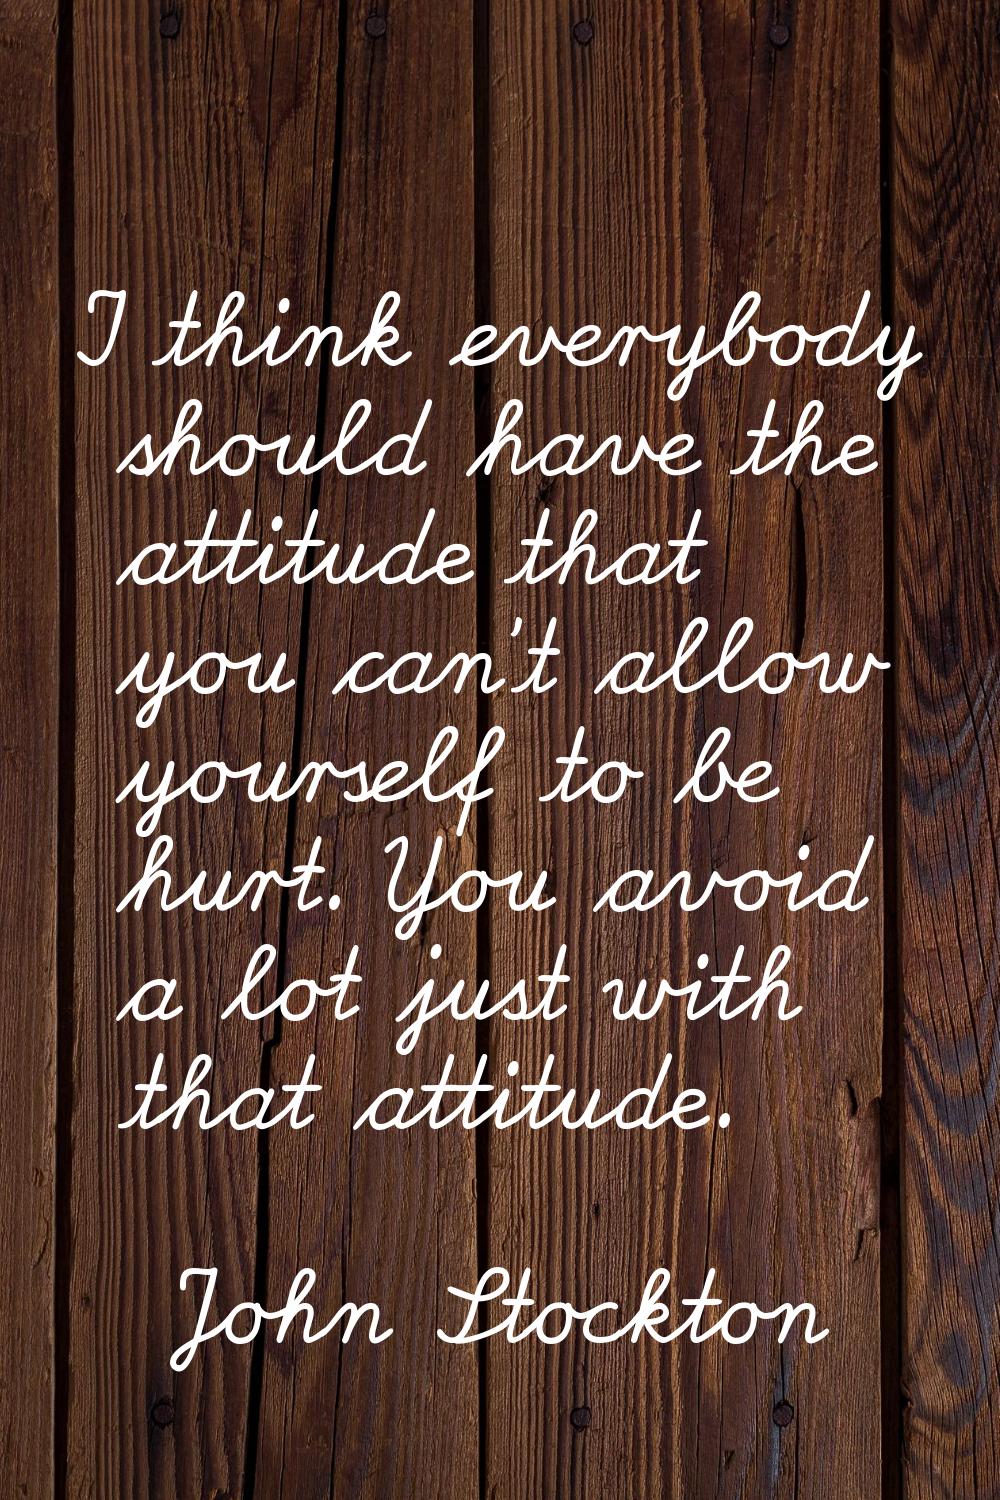 I think everybody should have the attitude that you can't allow yourself to be hurt. You avoid a lo